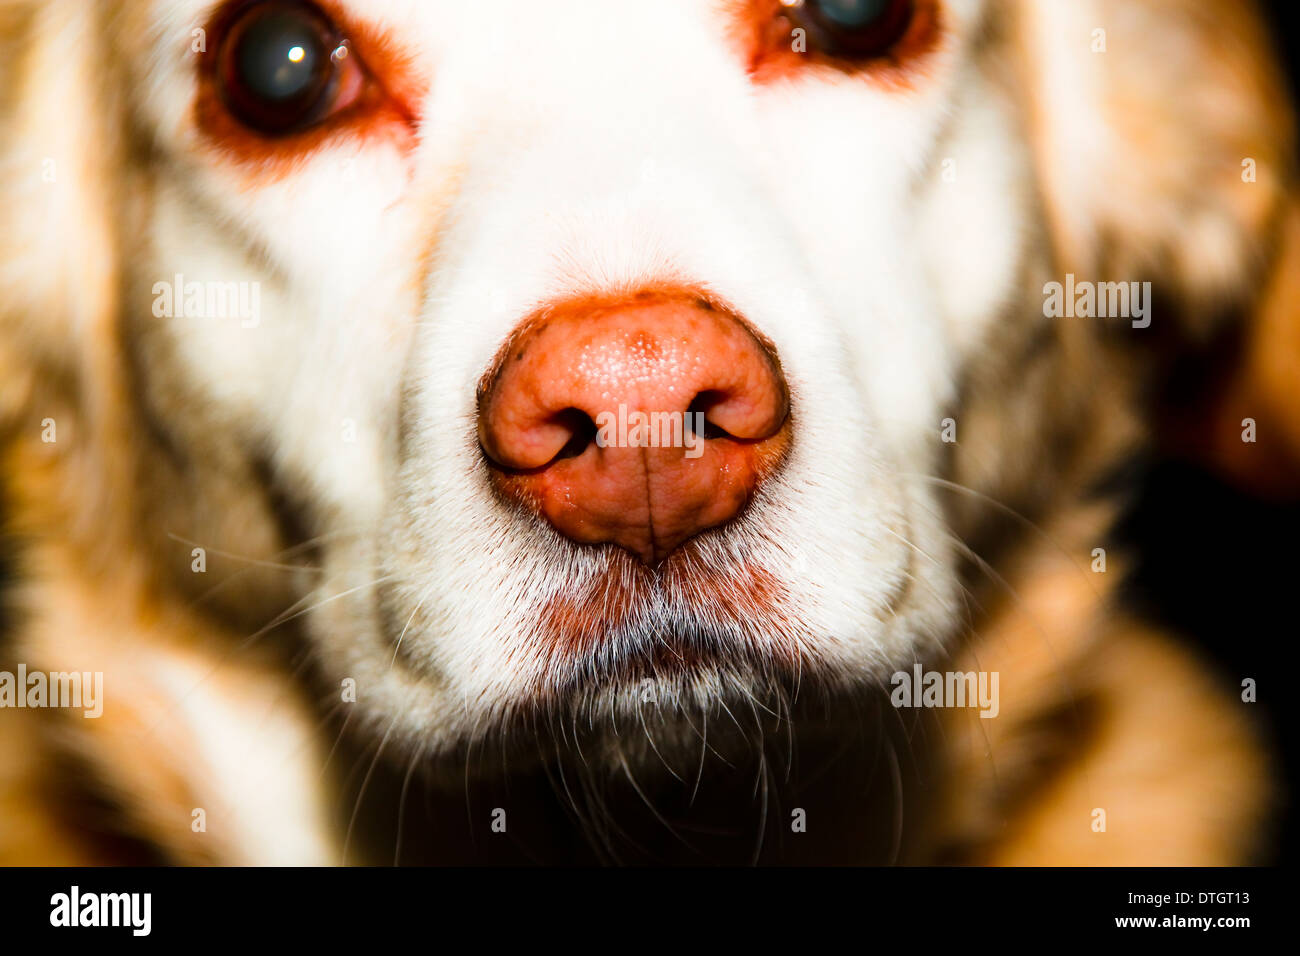 Golden mongrel dog's face and snout Stock Photo